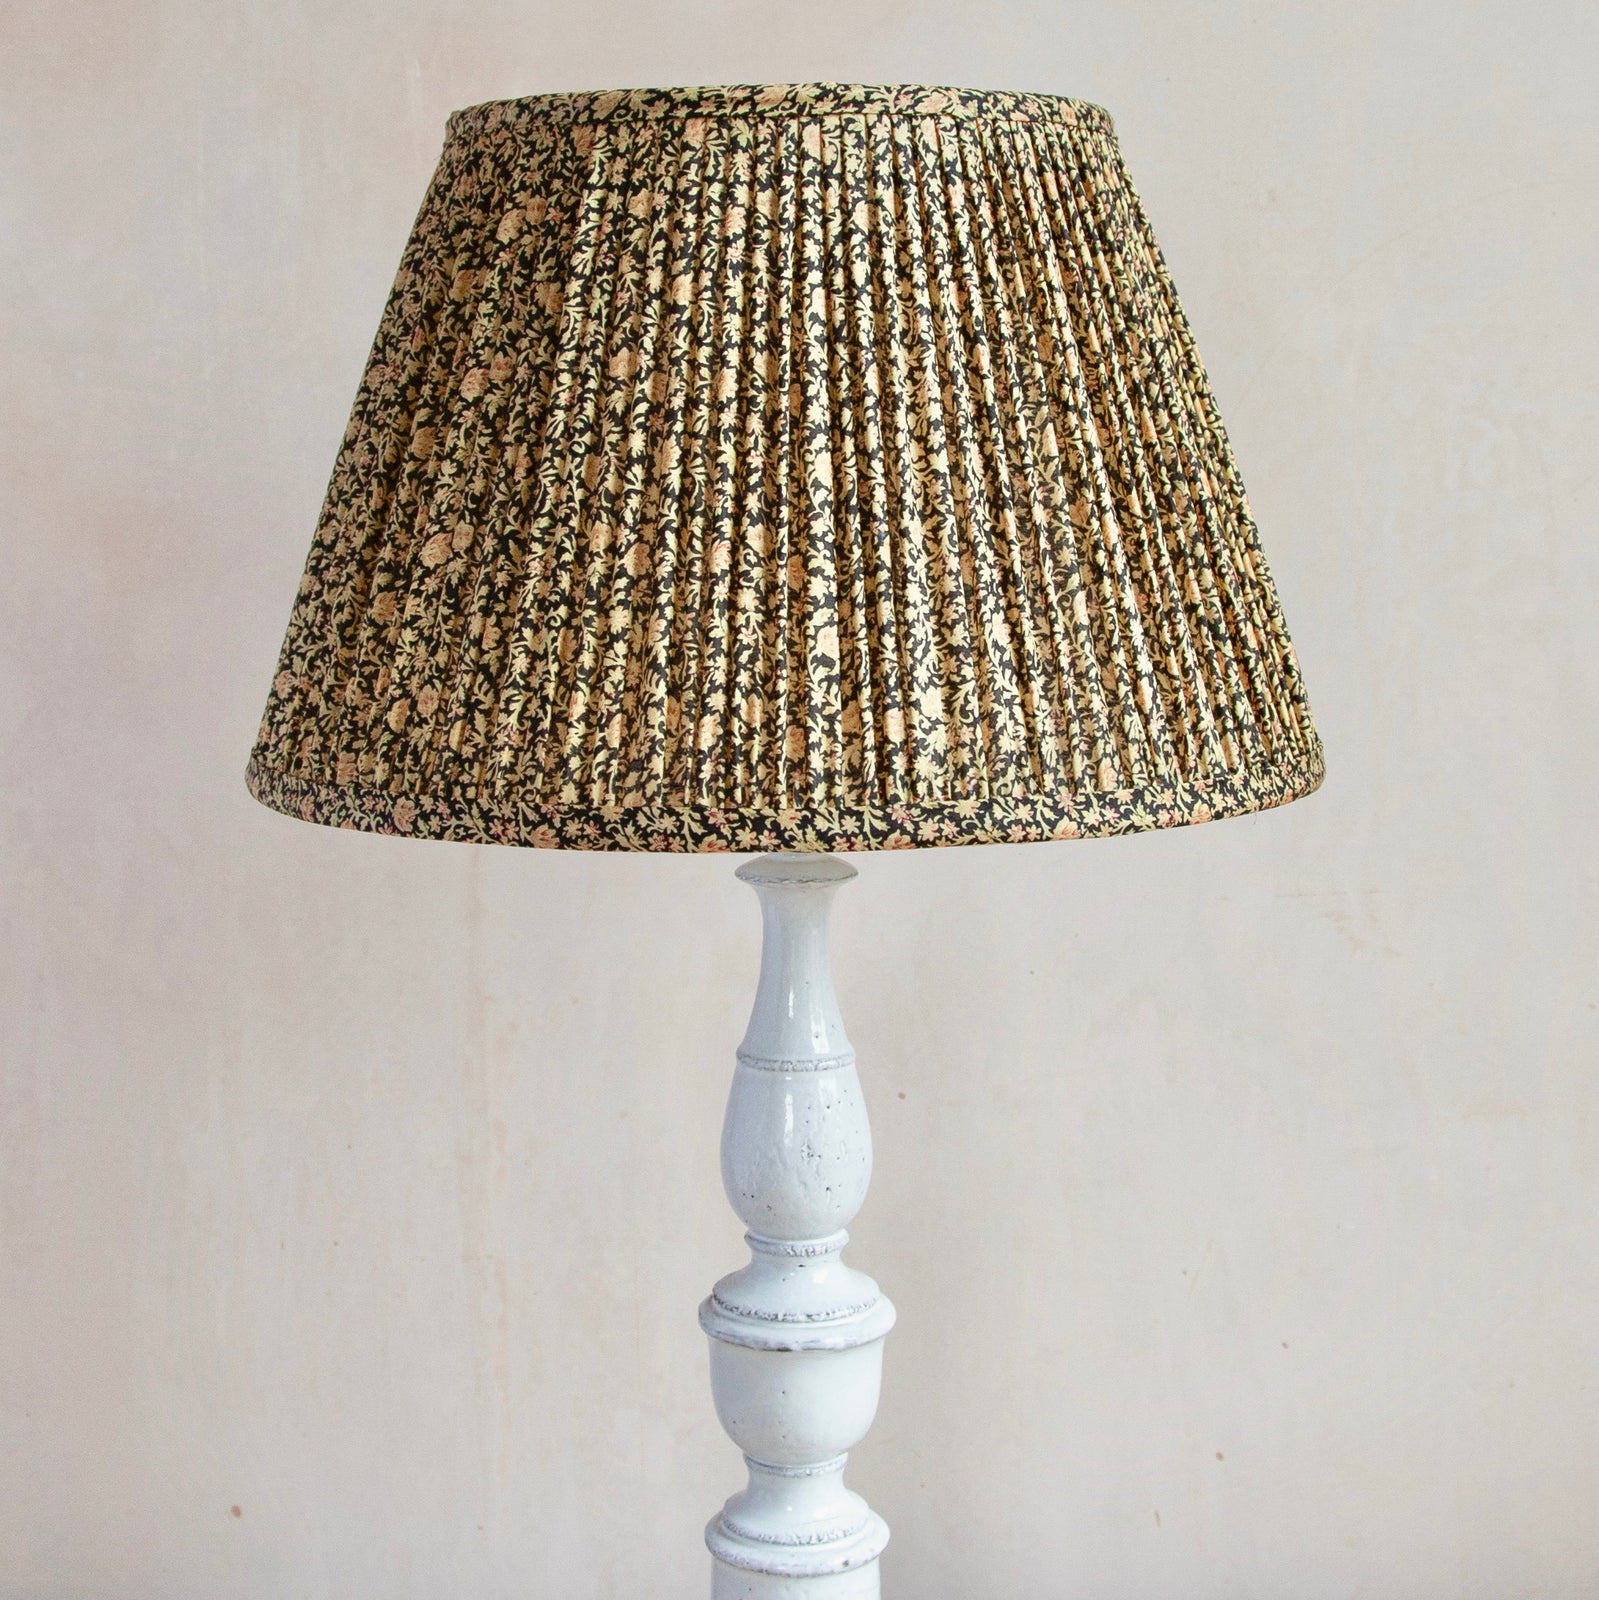 White Positano Lamp Base with Yellow and Black lampshade example